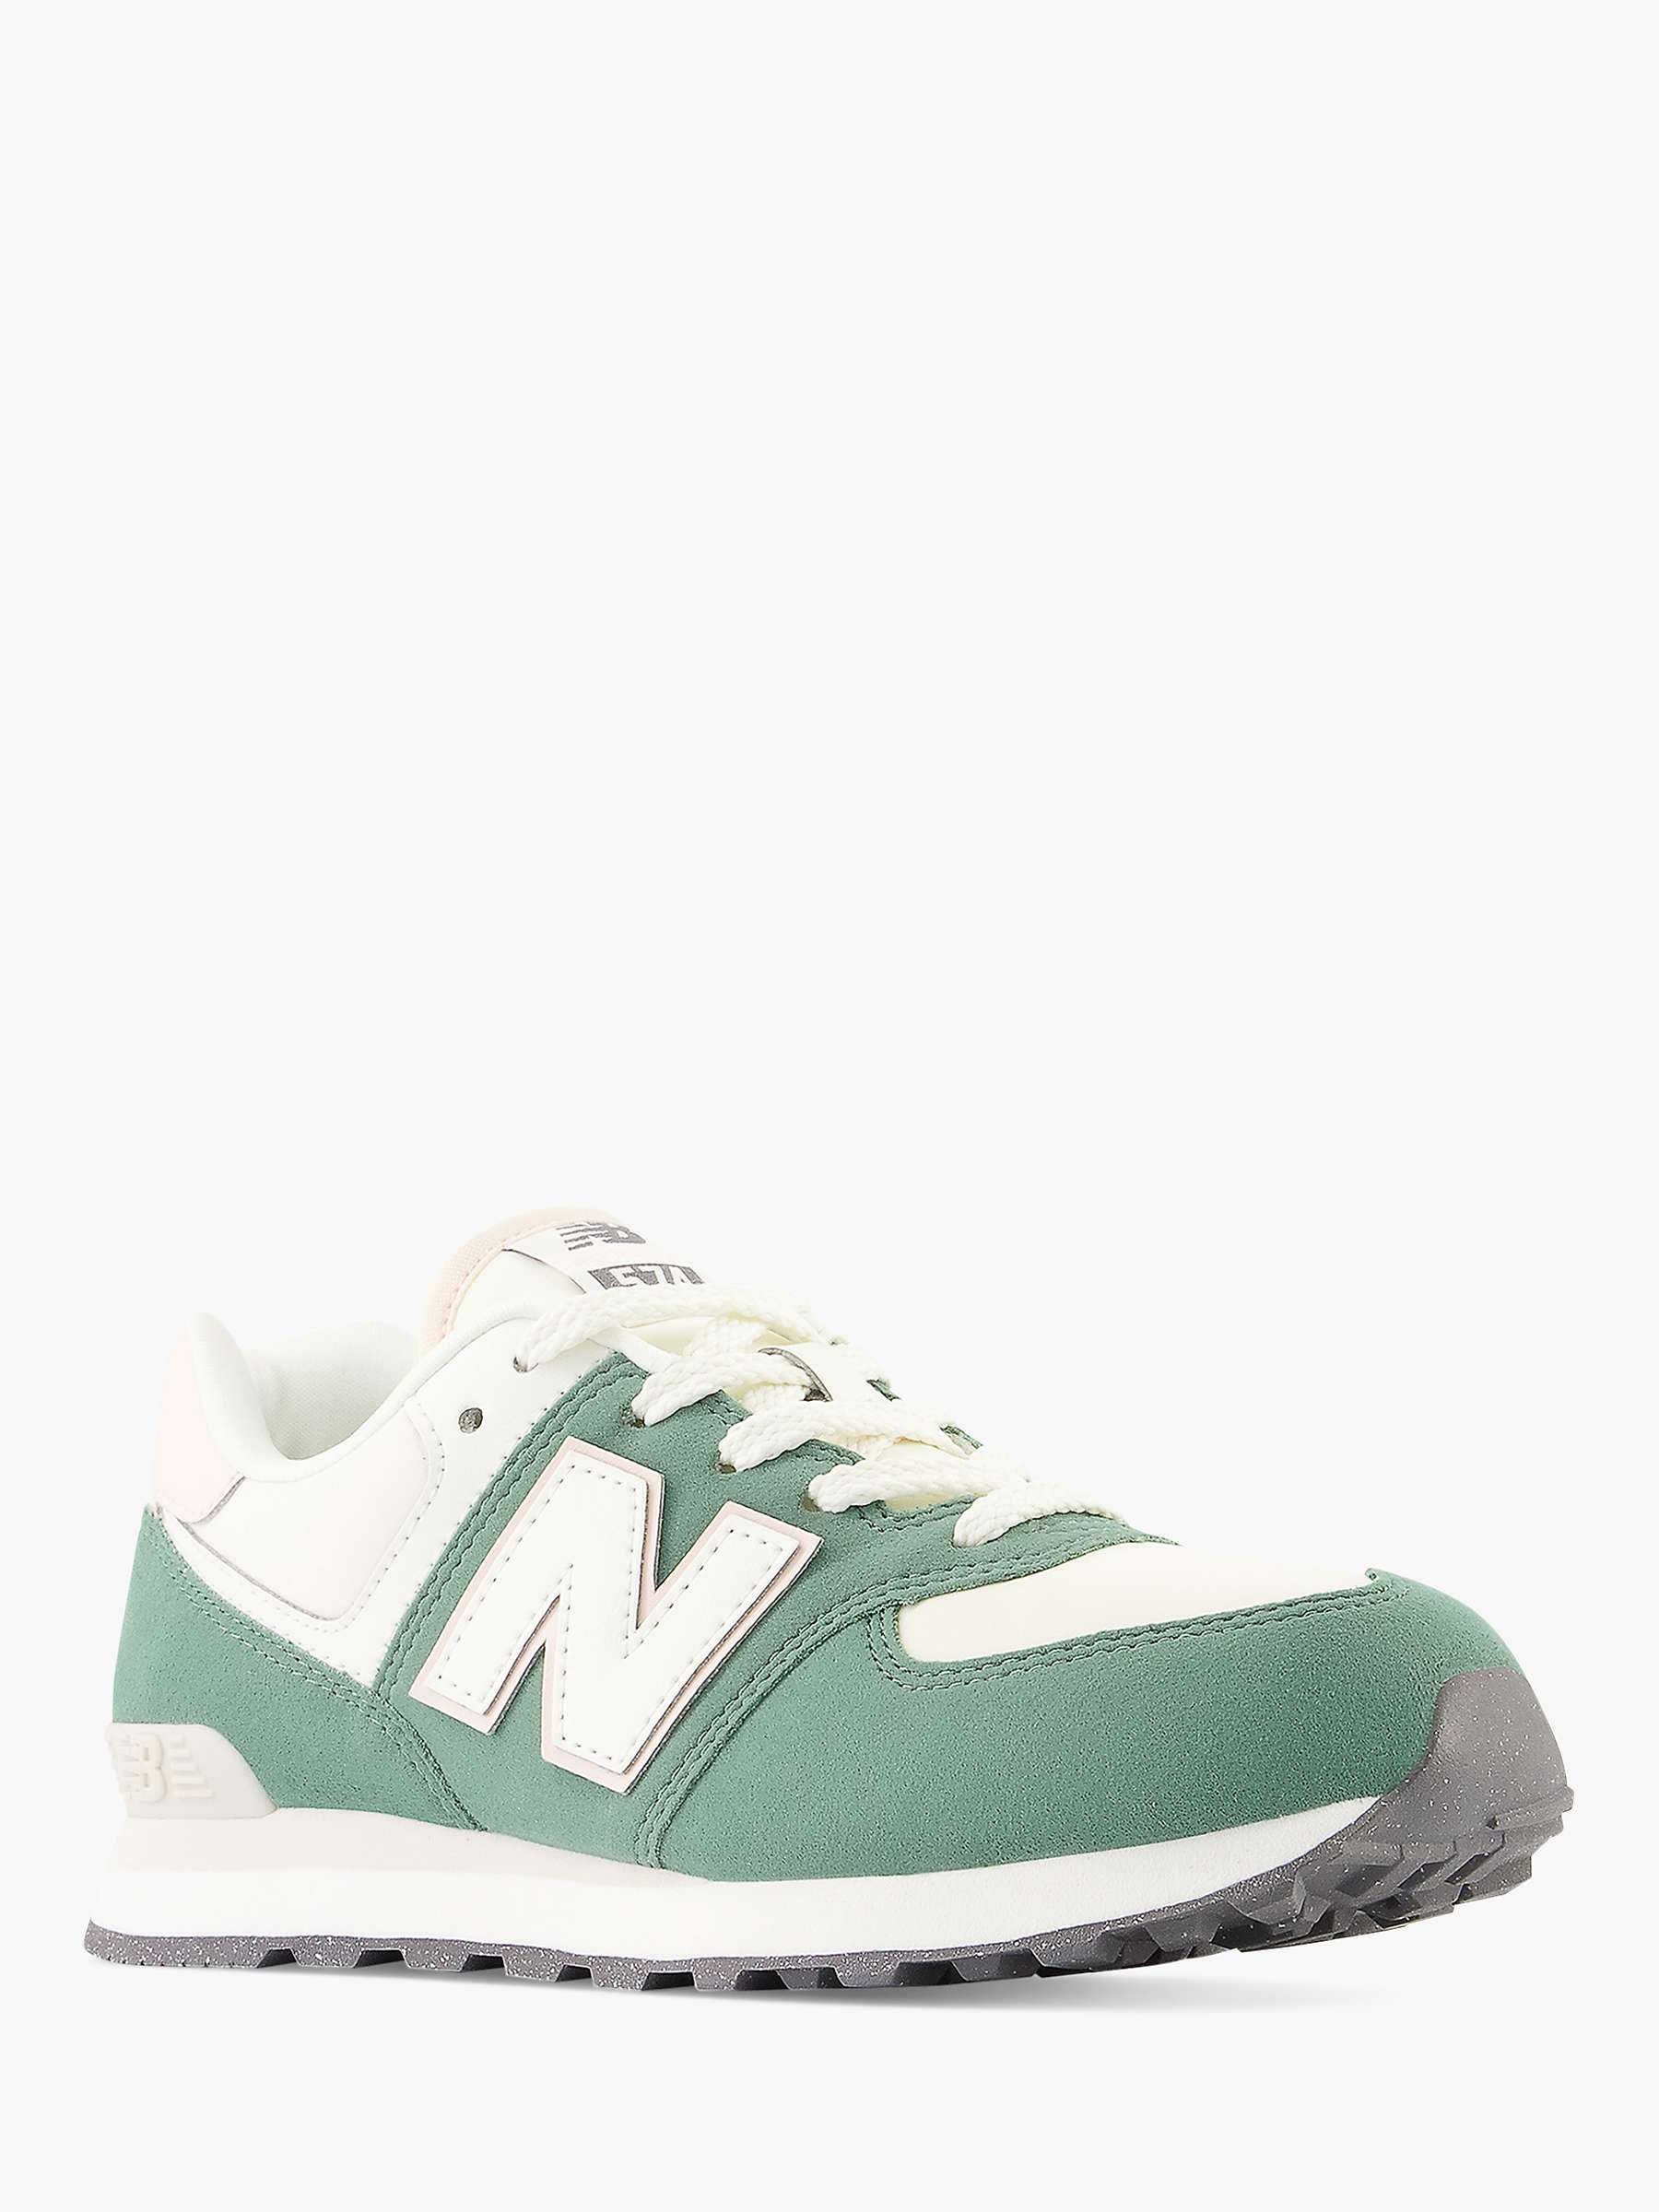 Buy New Balance Kids' 574 Lace-Up Trainers Online at johnlewis.com